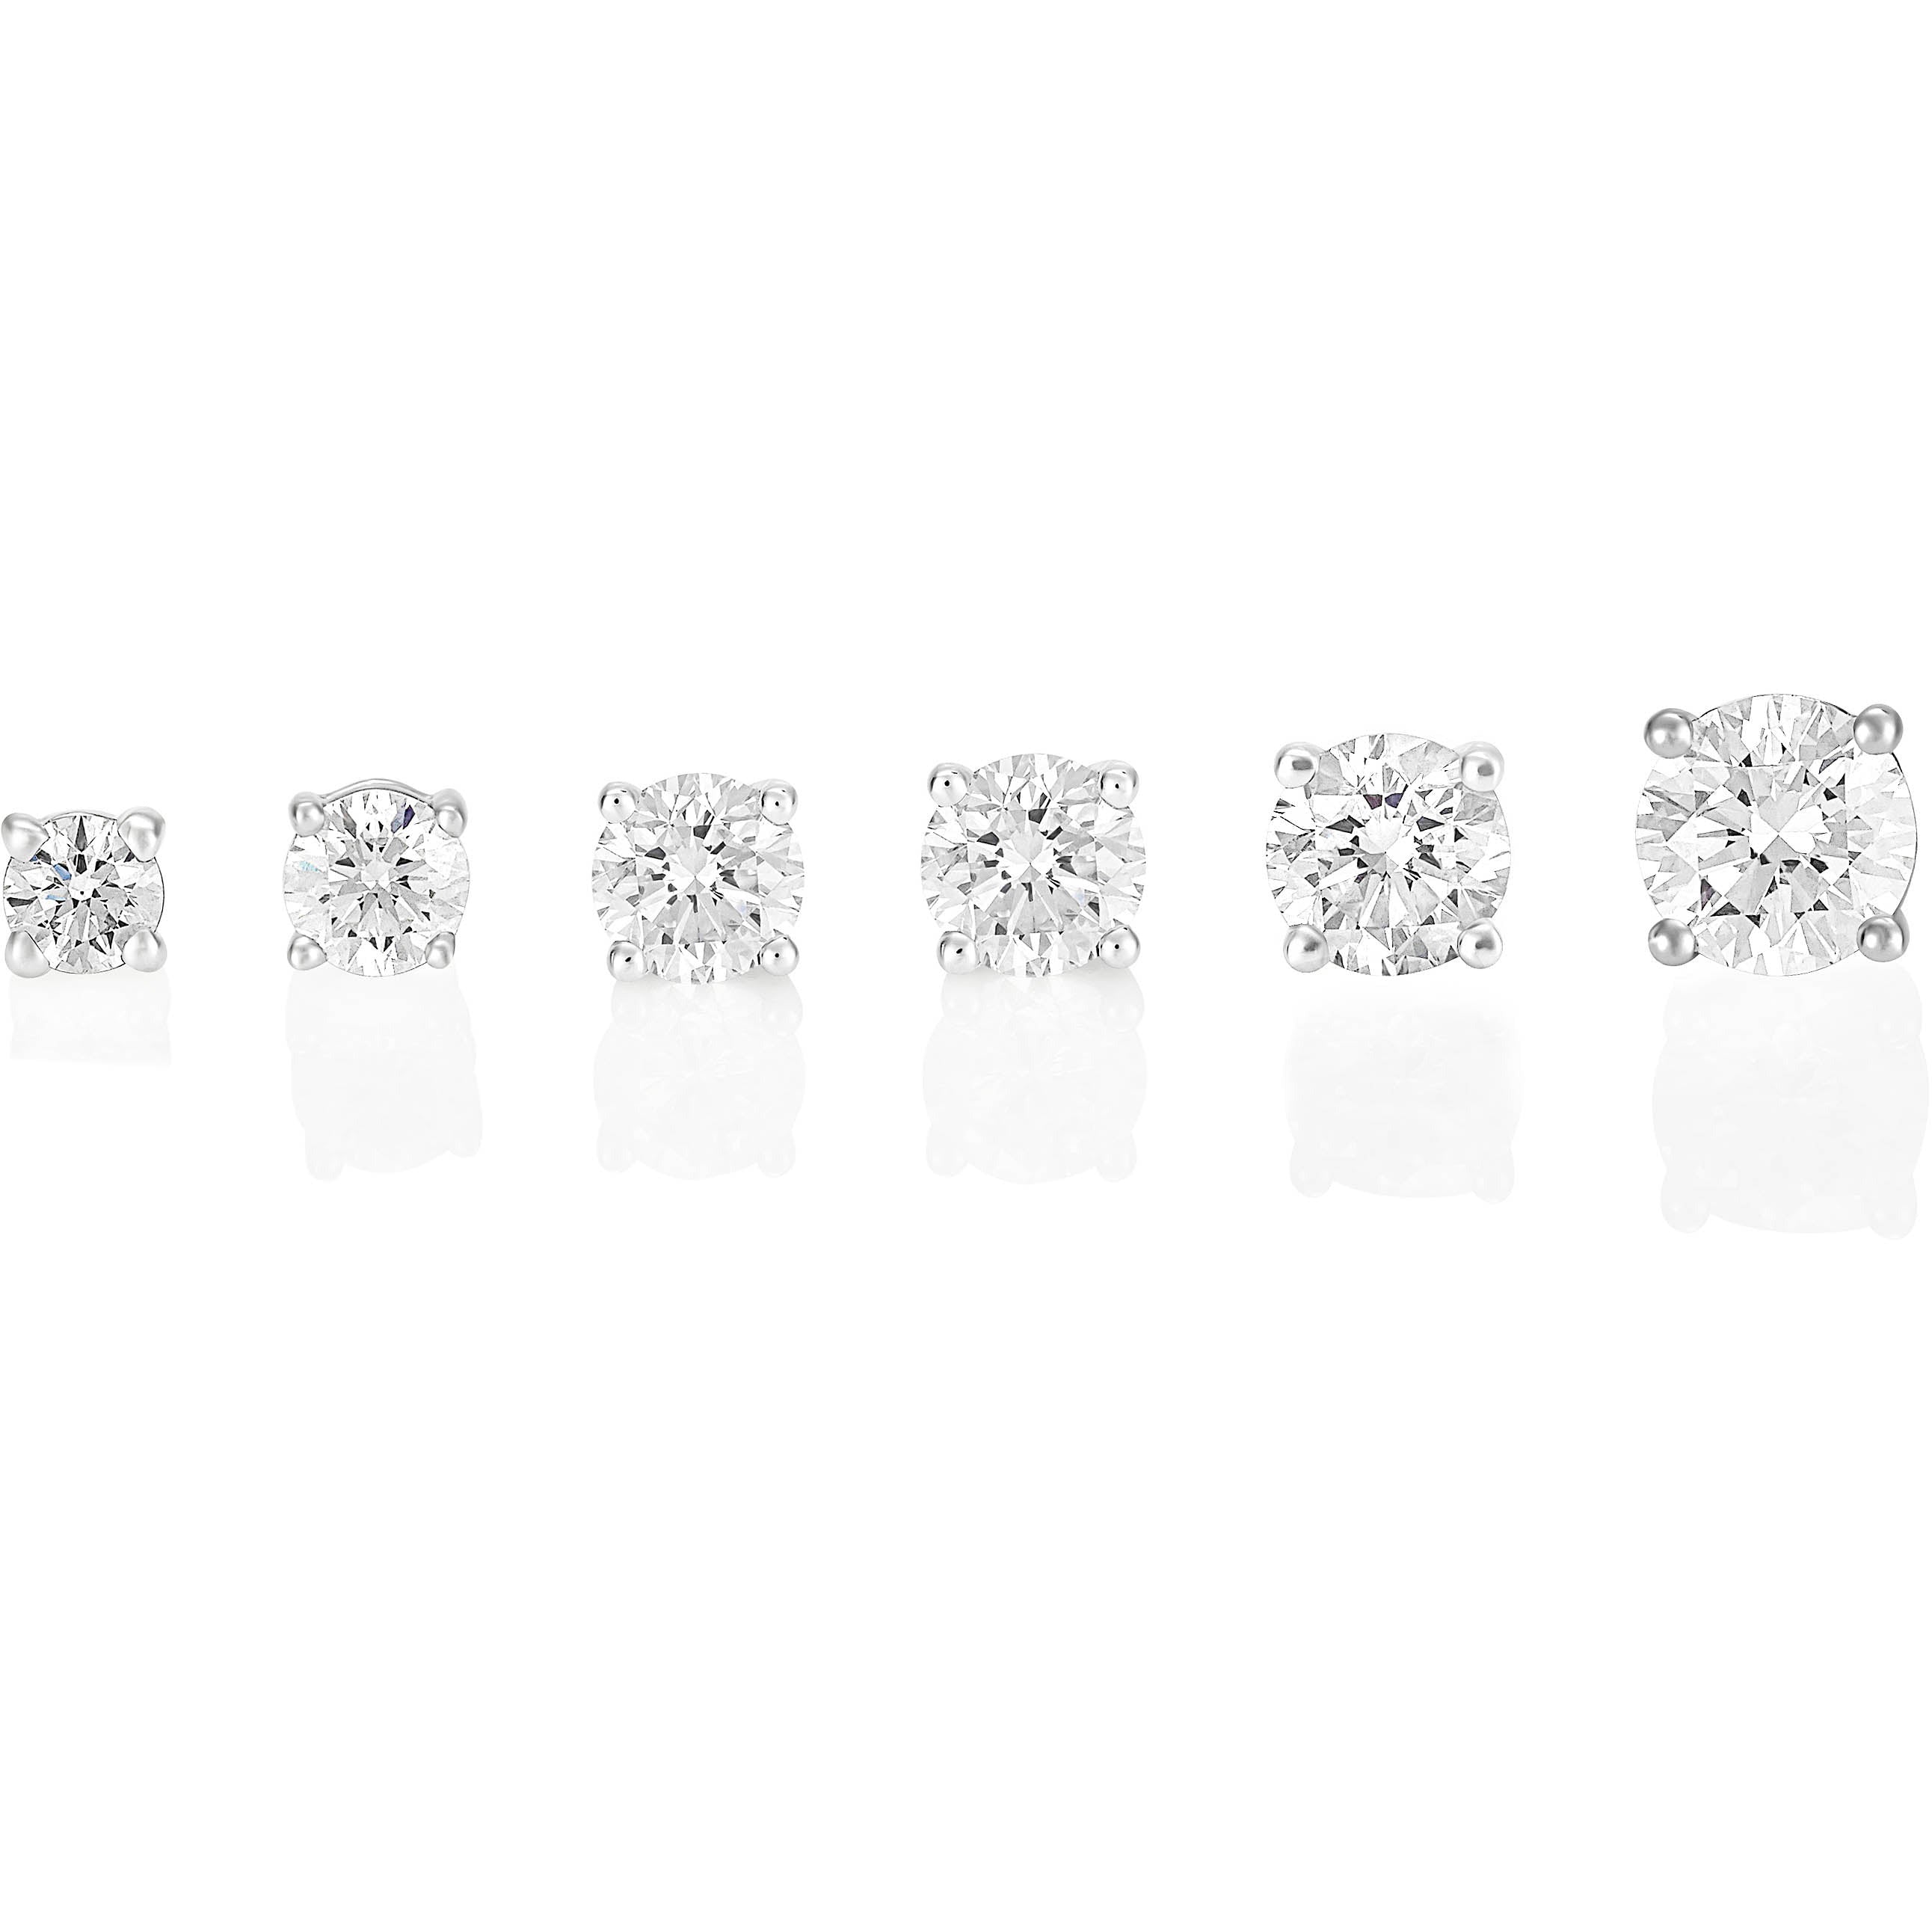 Palomino Solitaire Diamond Stud Earrings in 18 ct White Gold